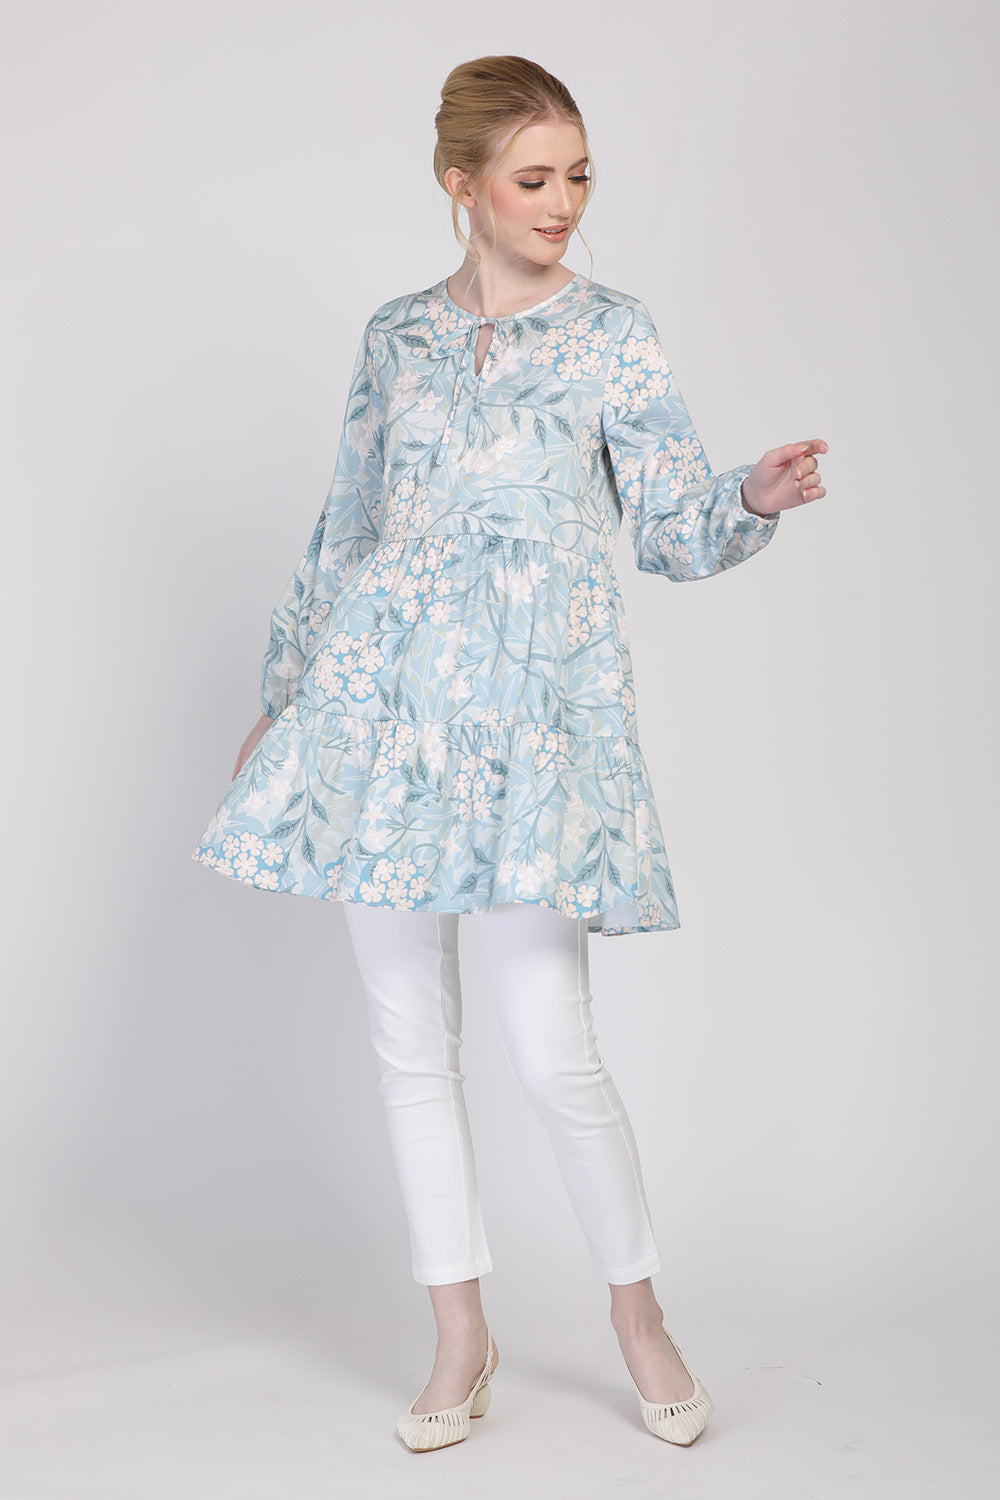 The Botani Floral Tunic in Dusty Green